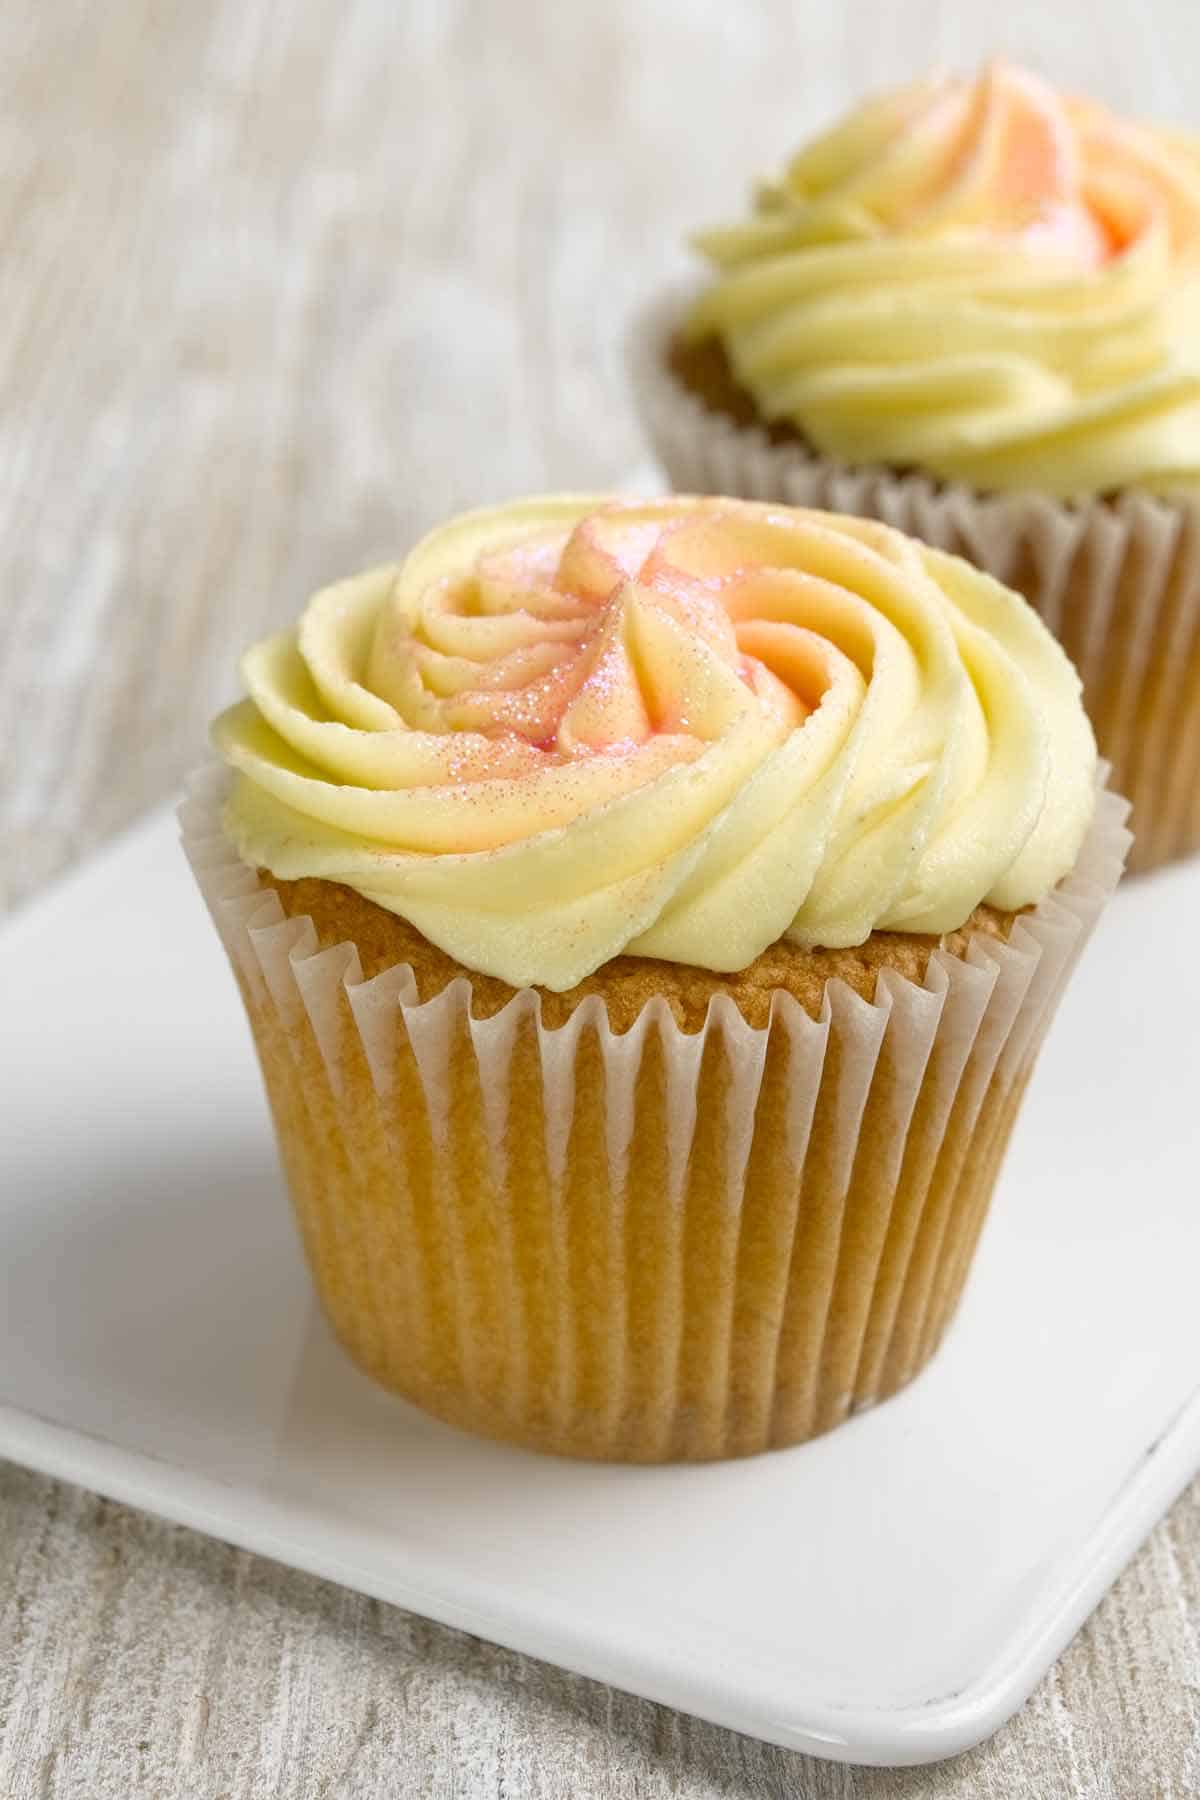 Lemon cupcake with cream cheese filling and frosting.